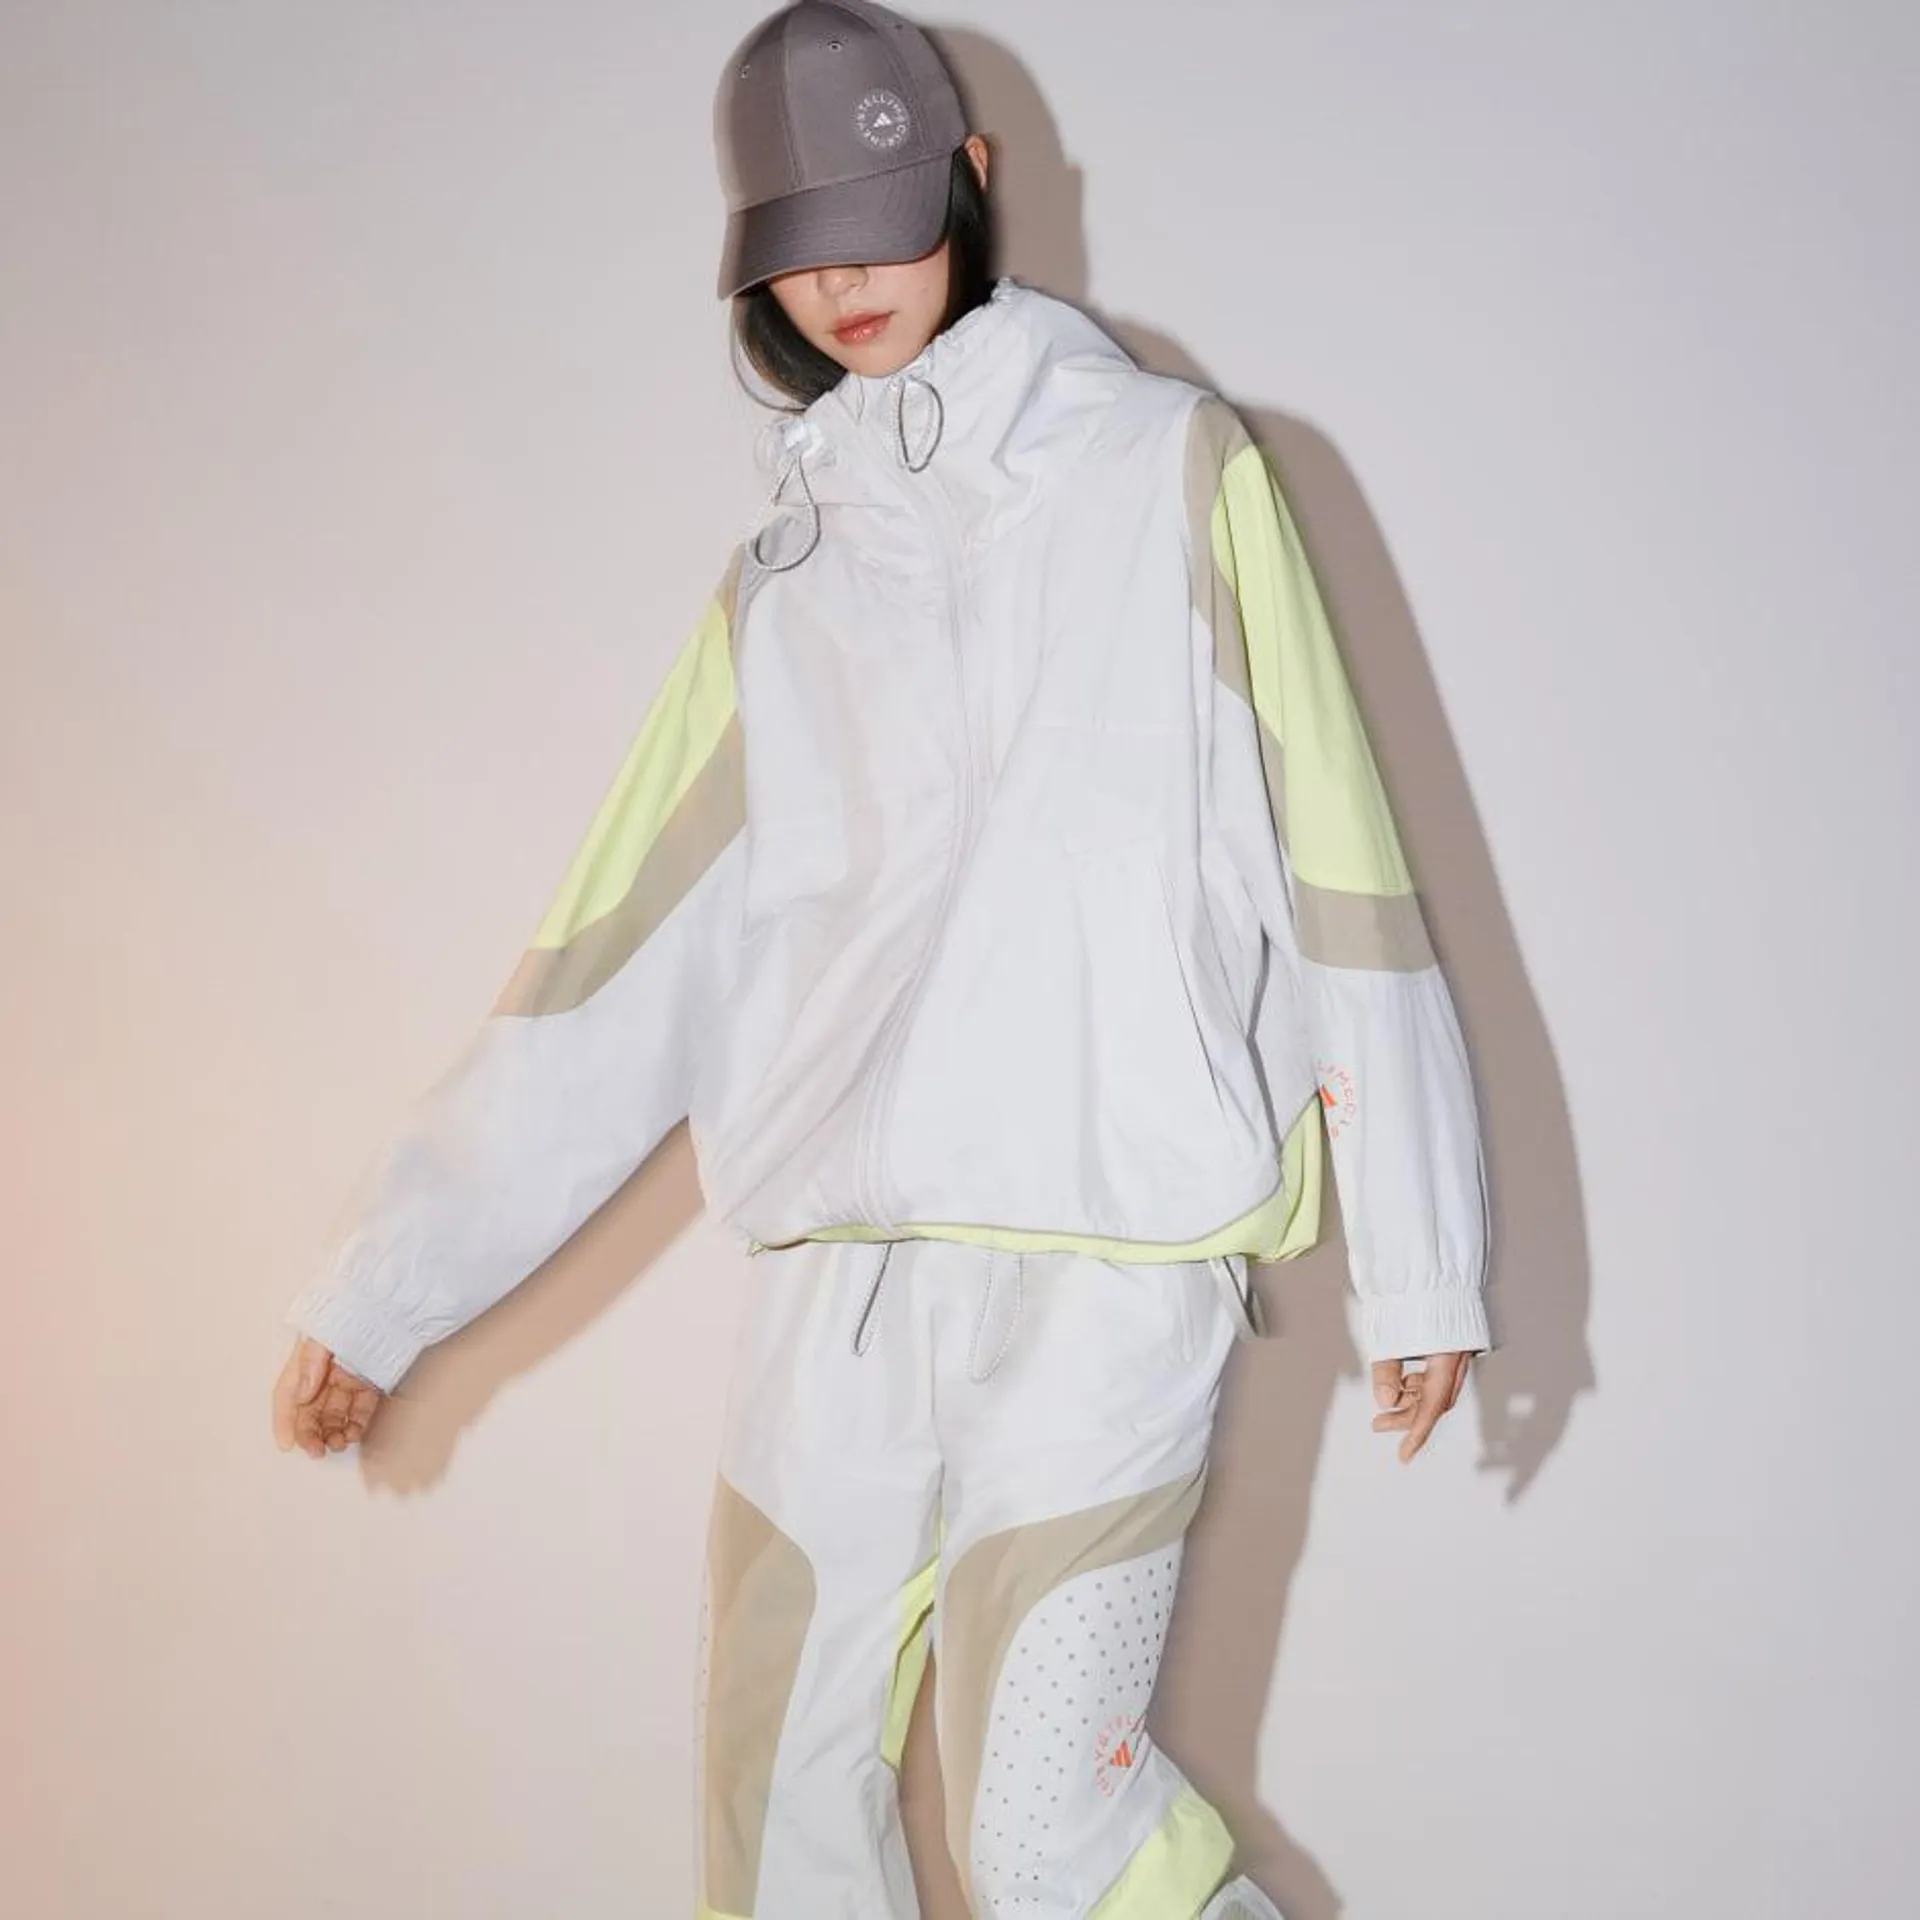 adidas by Stella McCartney Woven Track Top